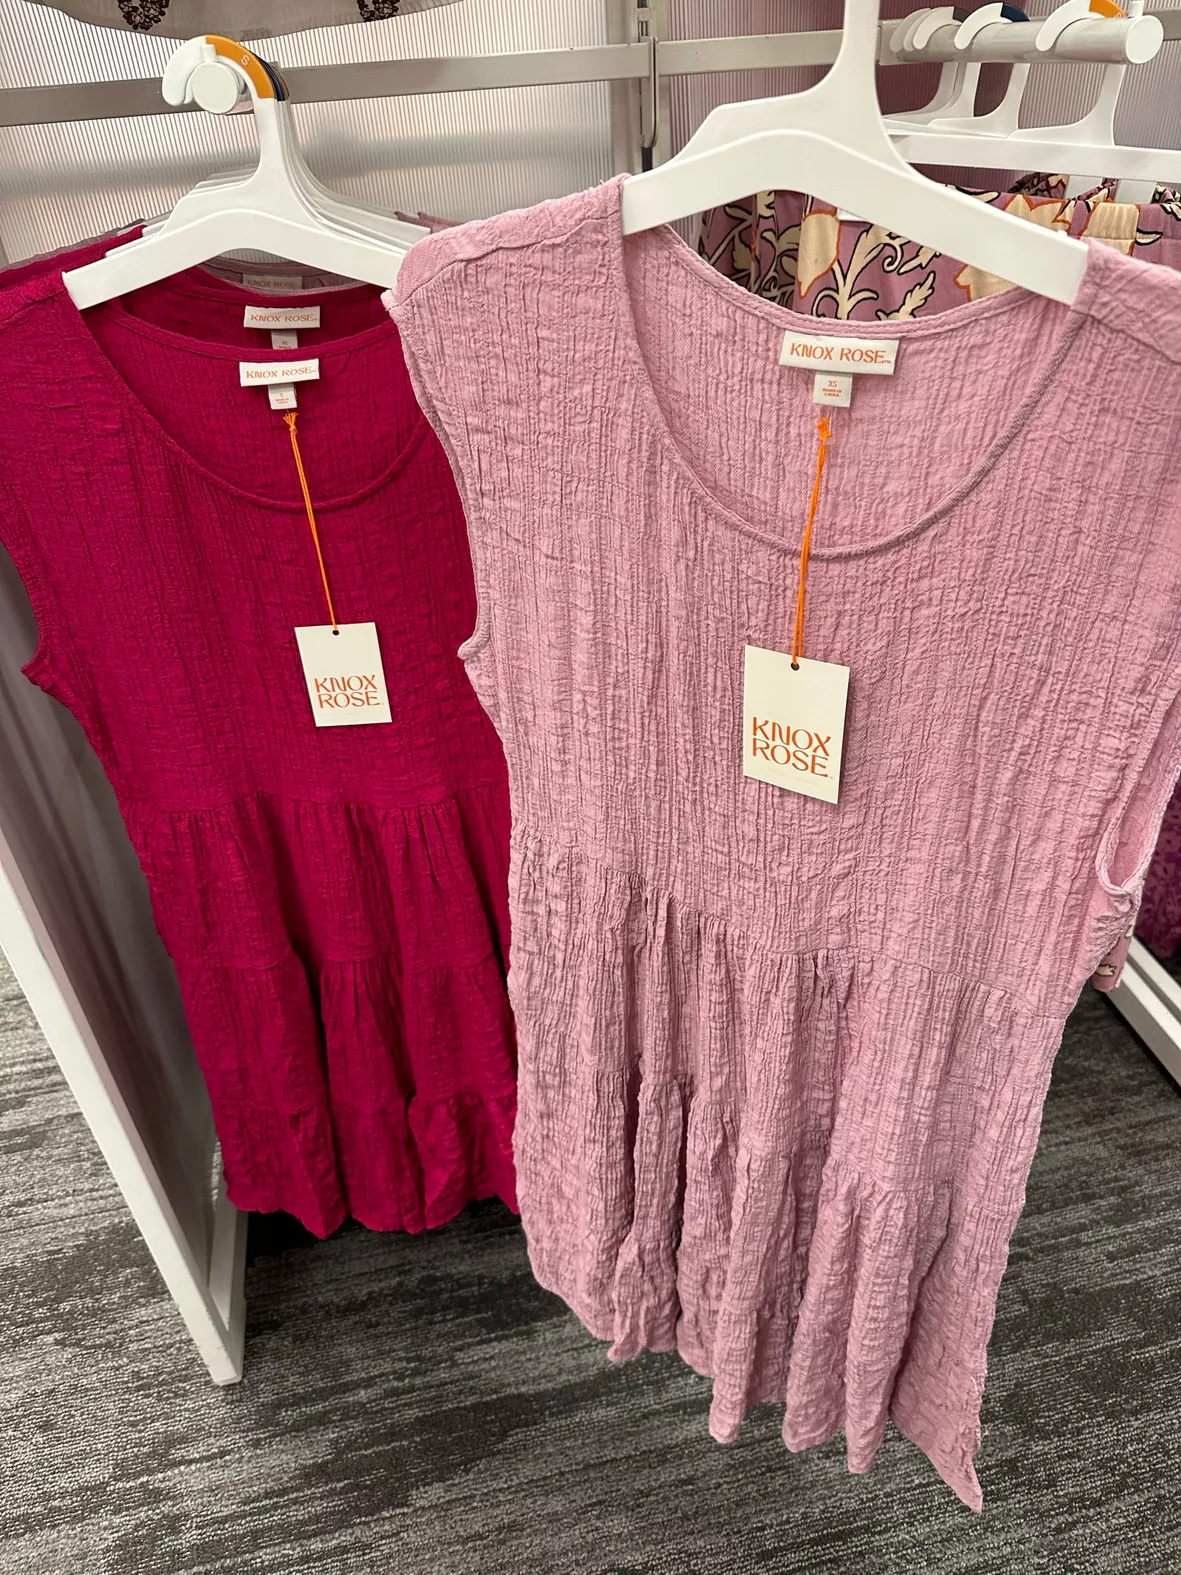 Knox Rose Women's Clothing for sale